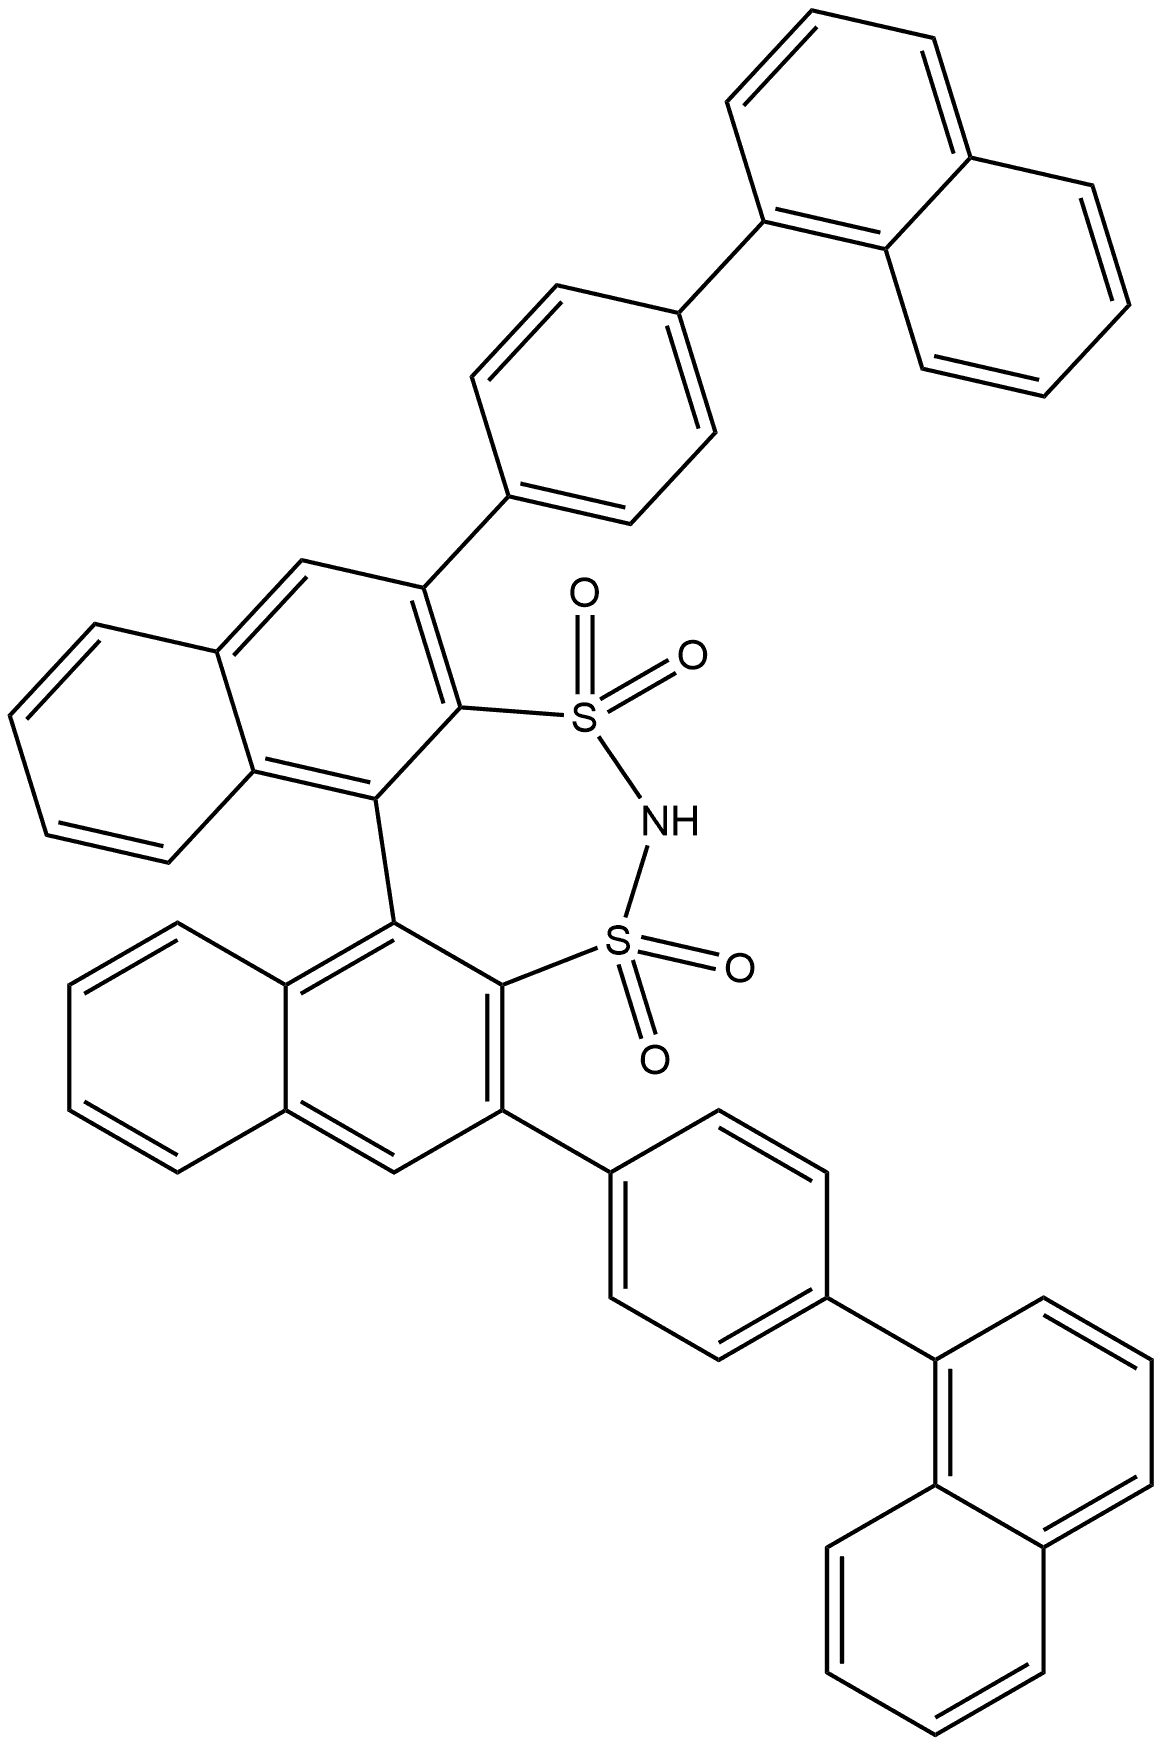 Dinaphtho[2,1-d:1',2'-f][1,3,2]dithiazepine, 2,6-bis[4-(1-naphthalenyl)phenyl]-, 3,3,5,5-tetraoxide, (11bR)- Structure